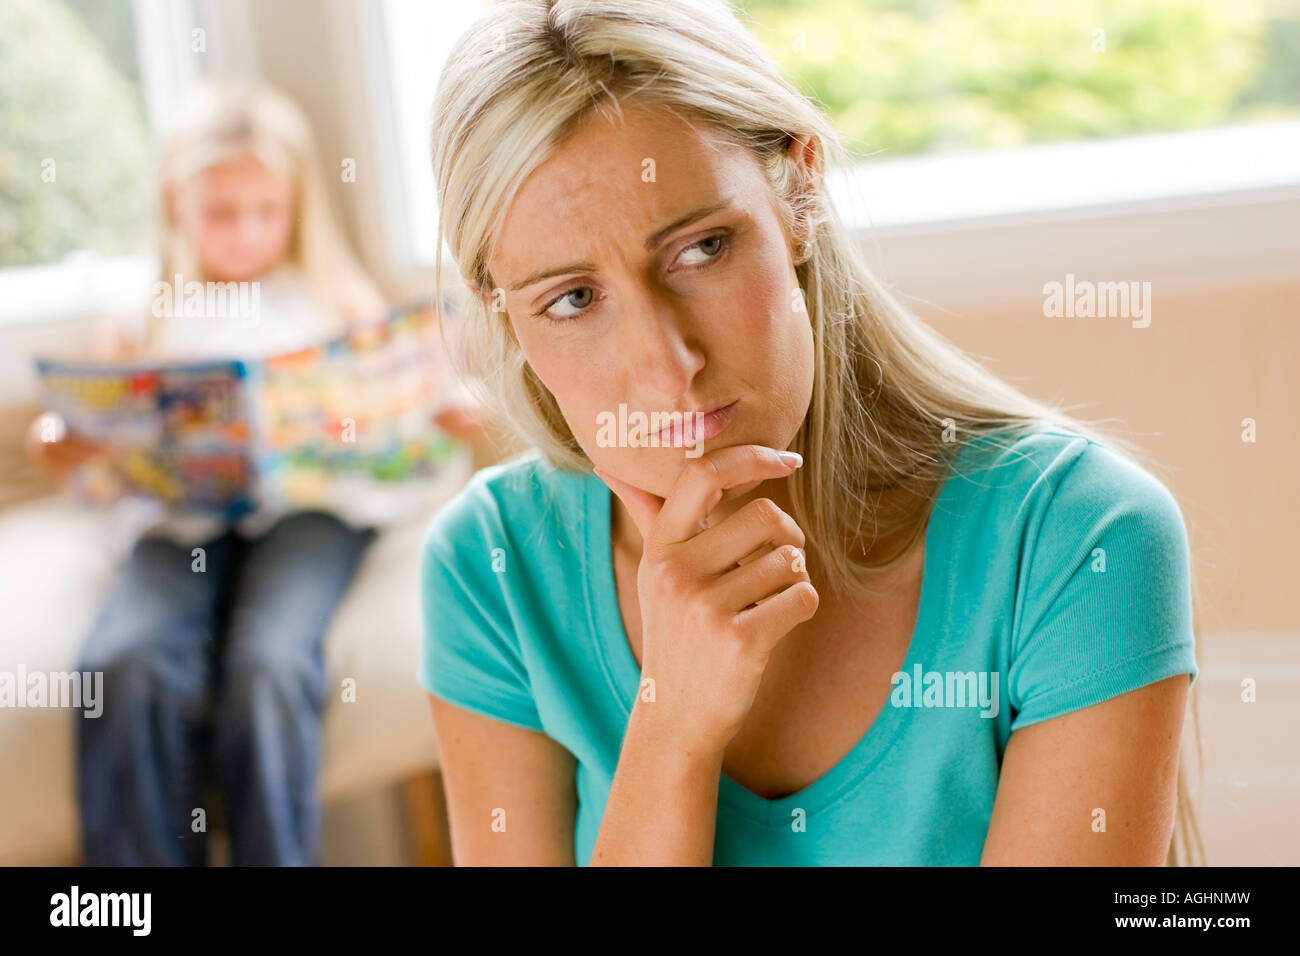 mother in the foreground looking worried with daughter in the background Stock Photo